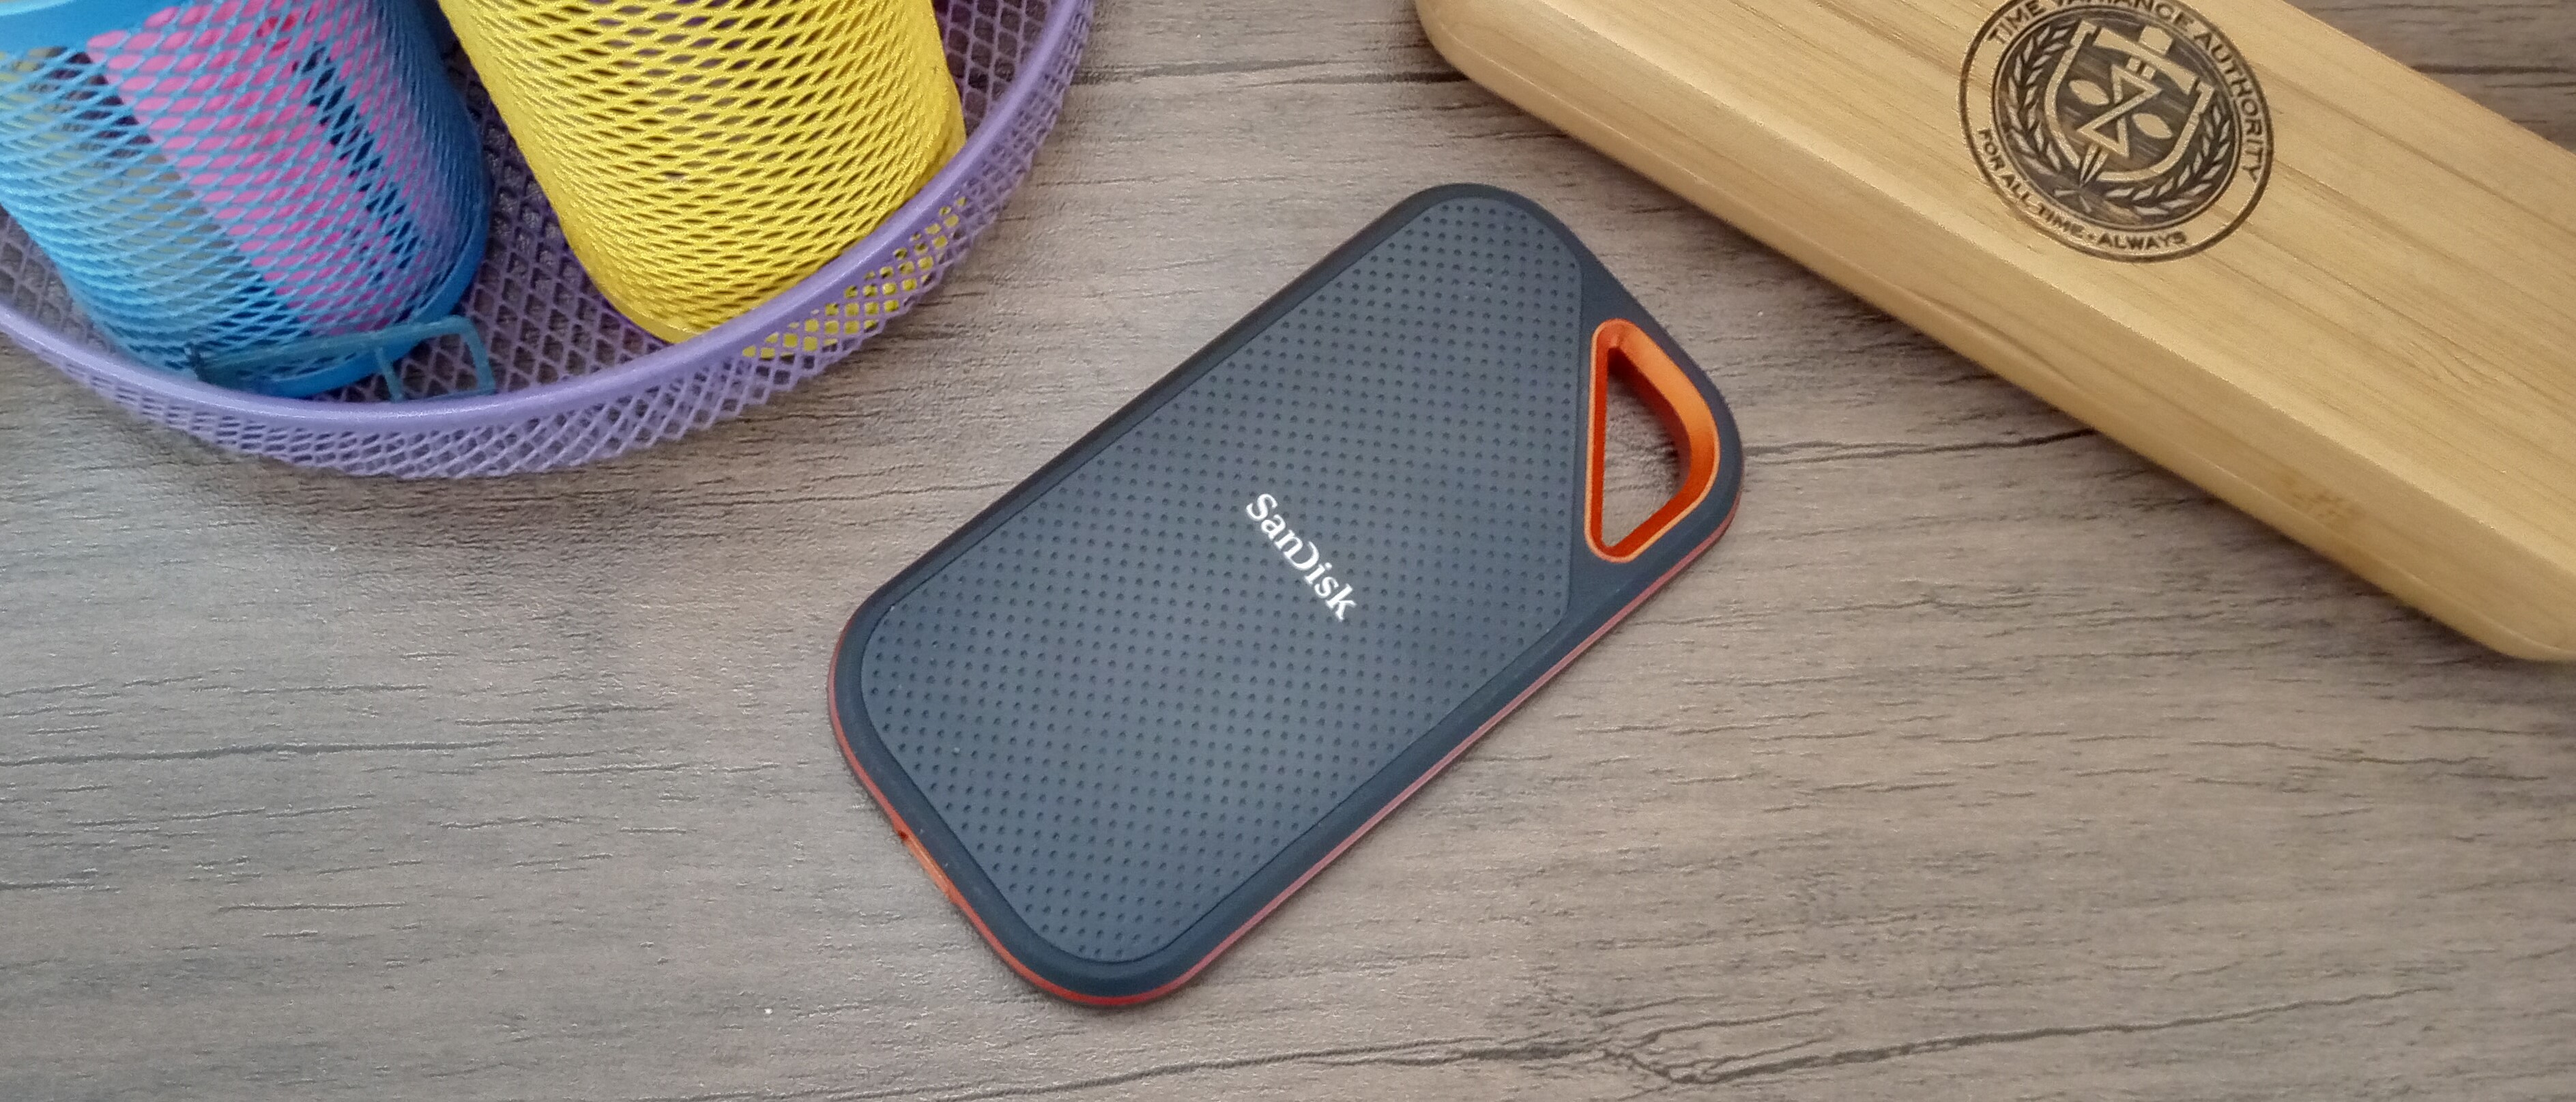 The best portable SSD: SanDisk Extreme PRO Review - 9to5Toys